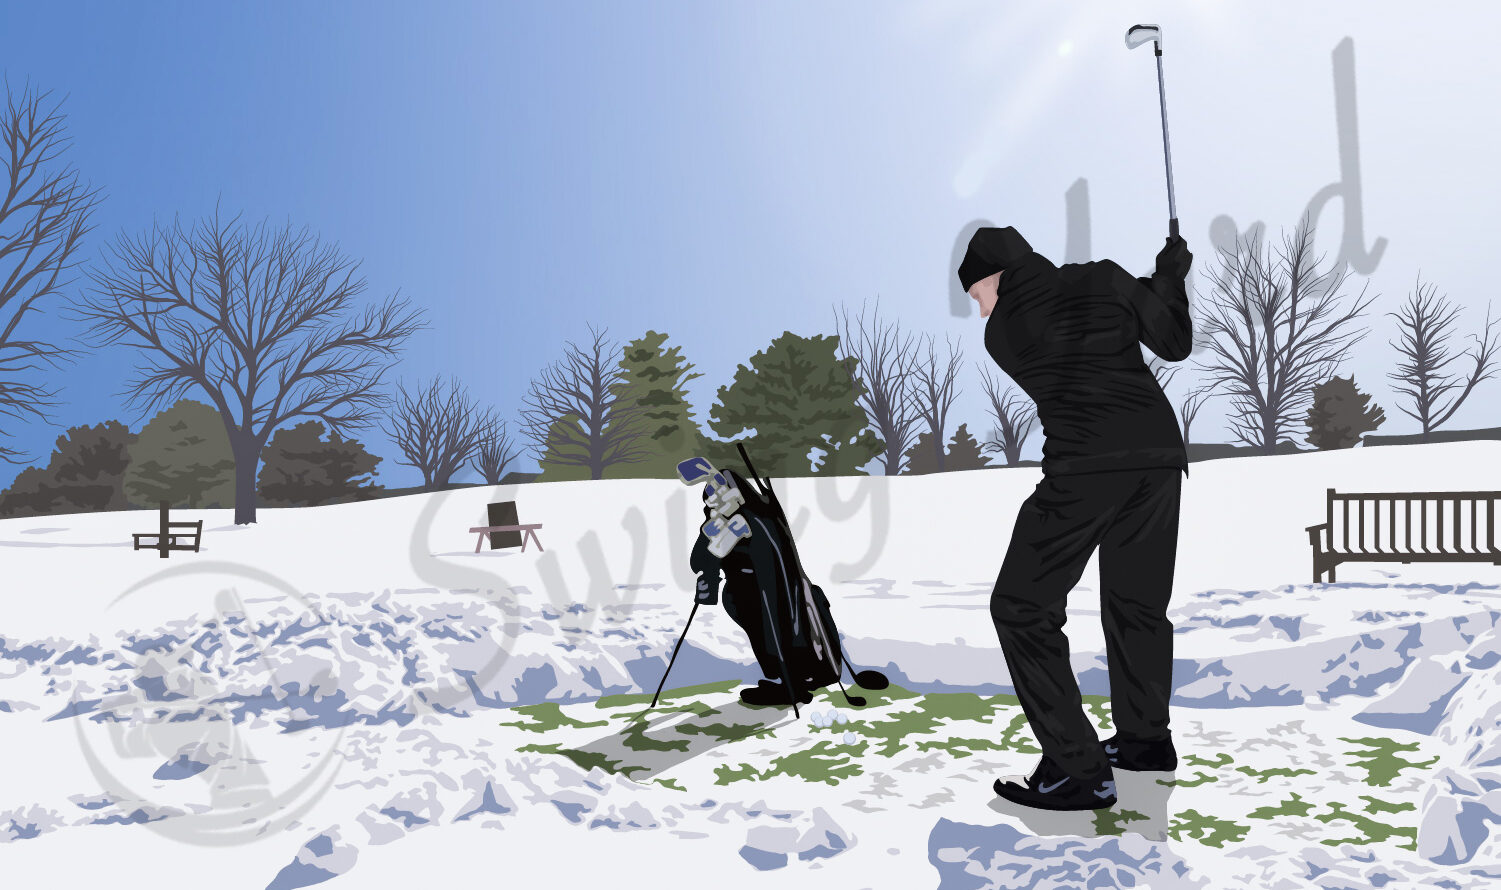 A guy golfing in the winter snow